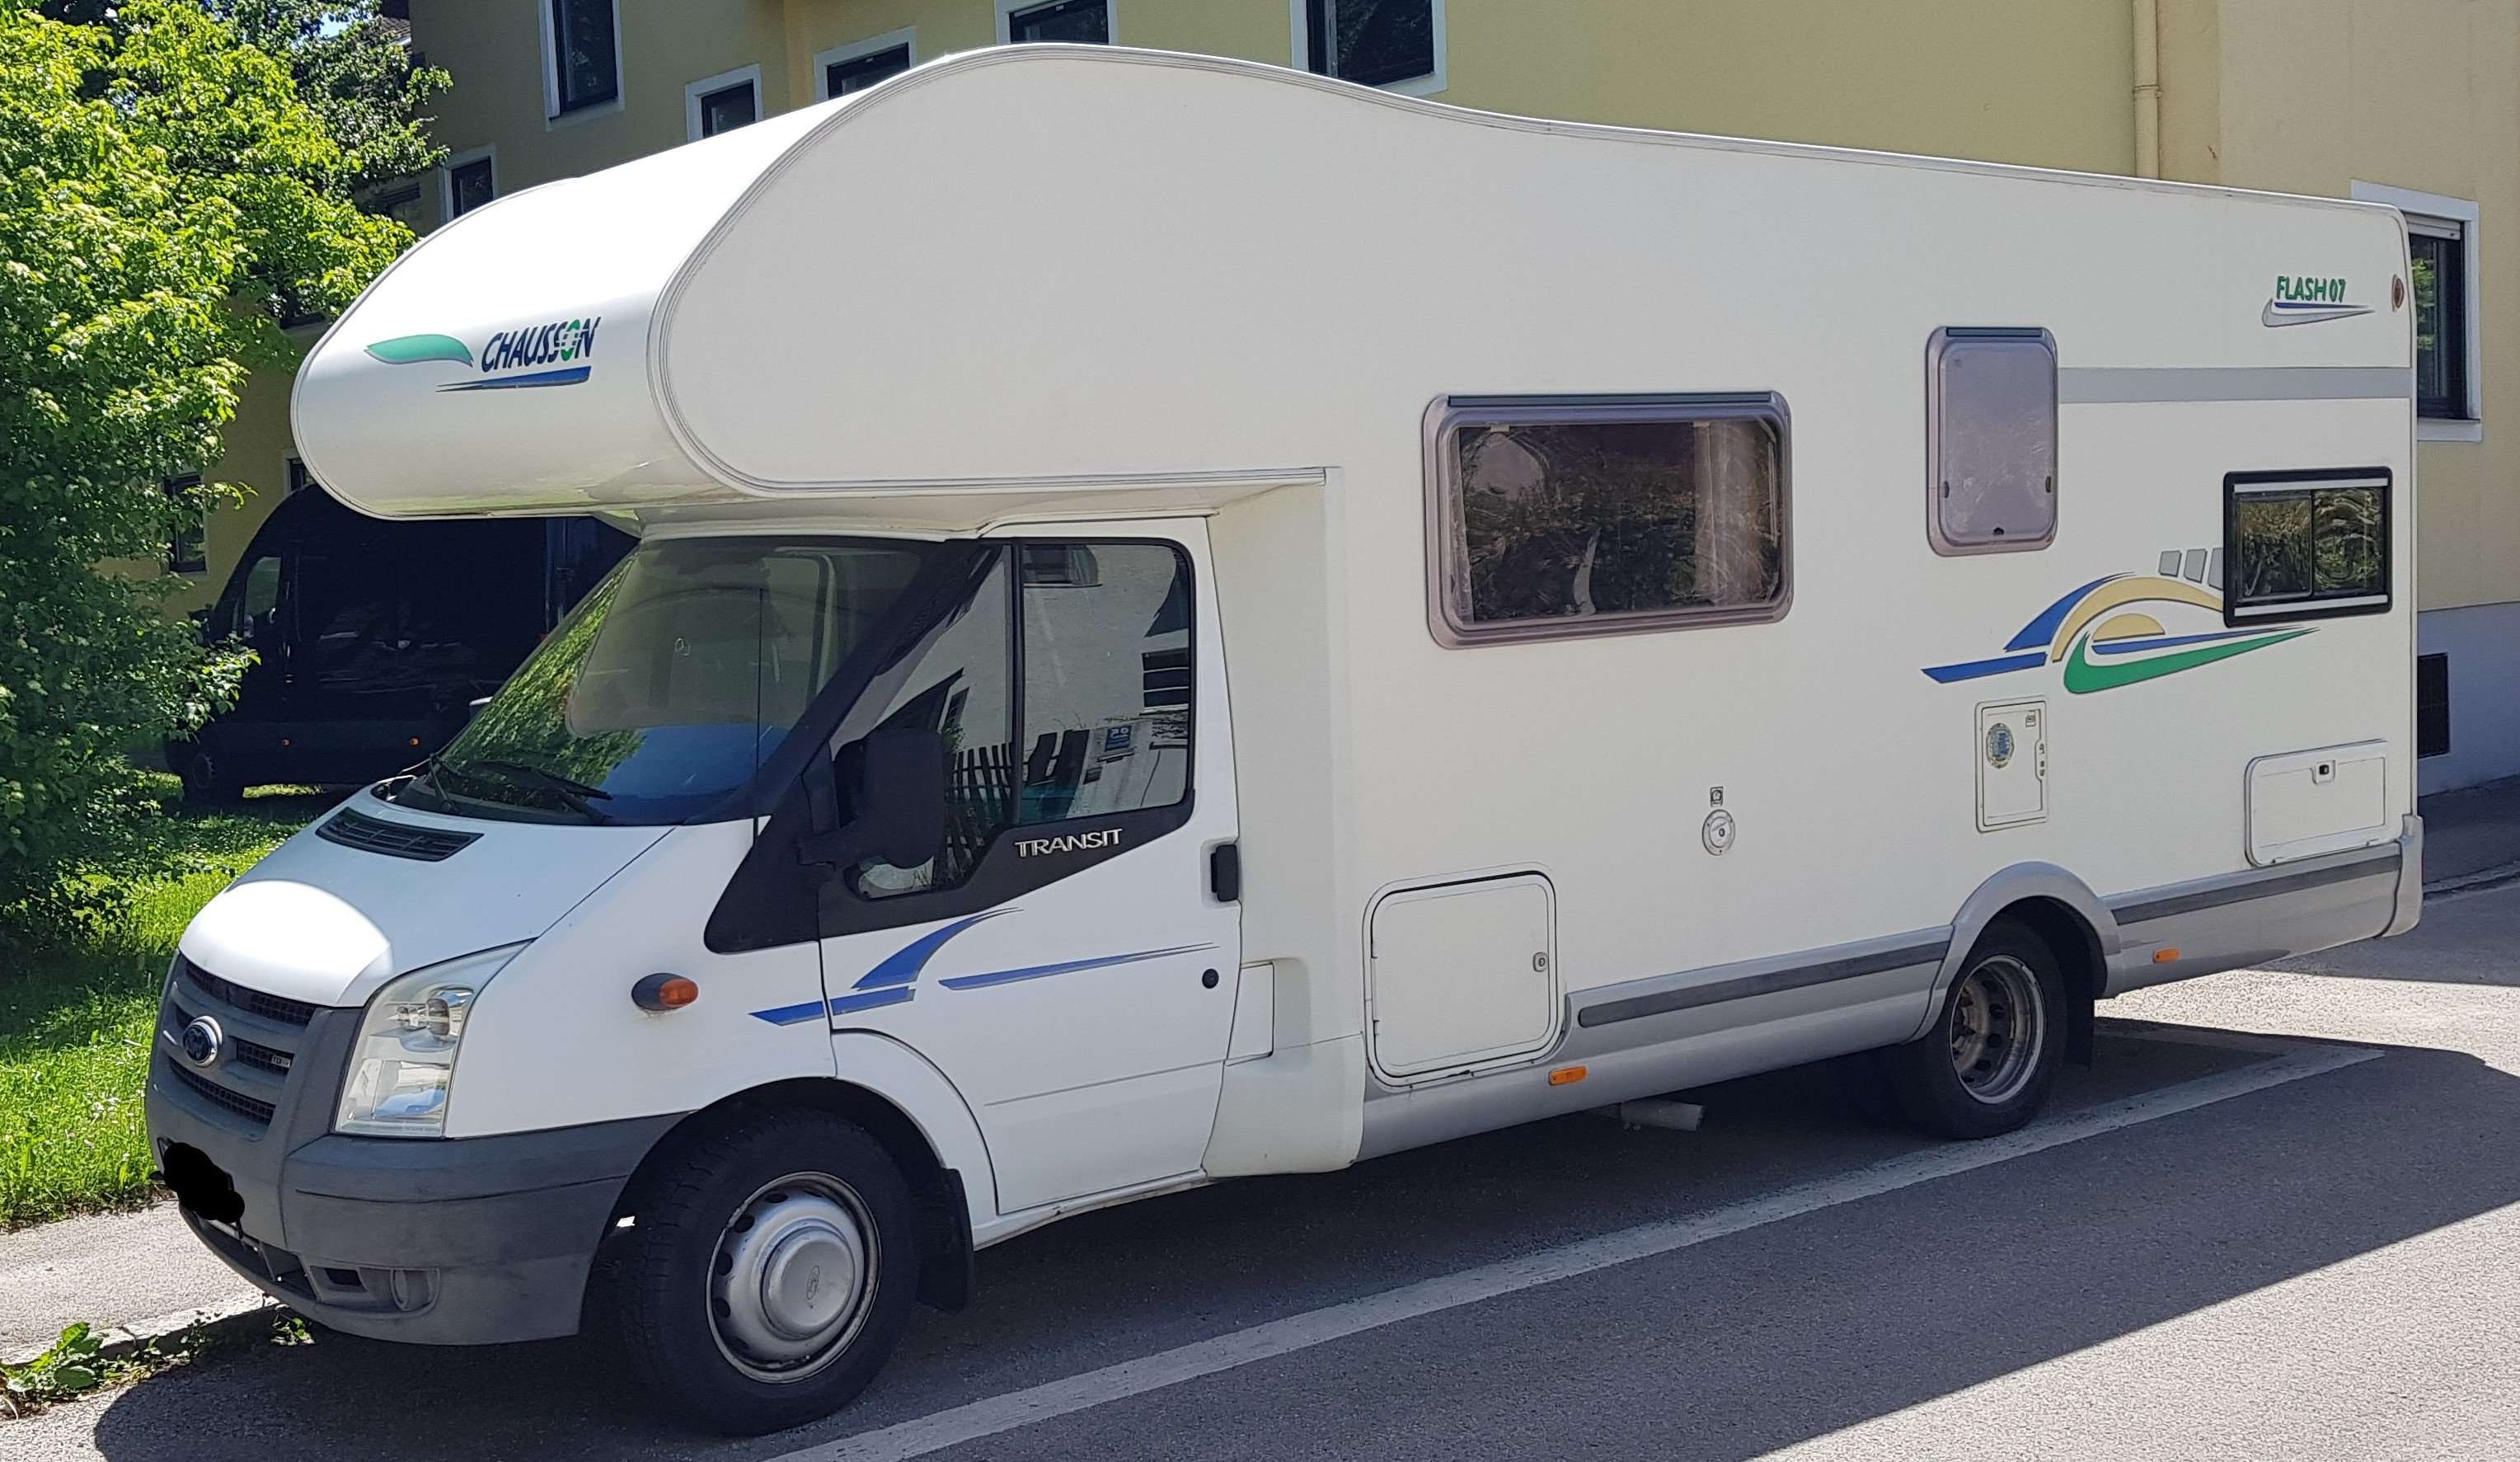 Caravans-Wohnm Chausson Other in White used in München for € 39,999.-